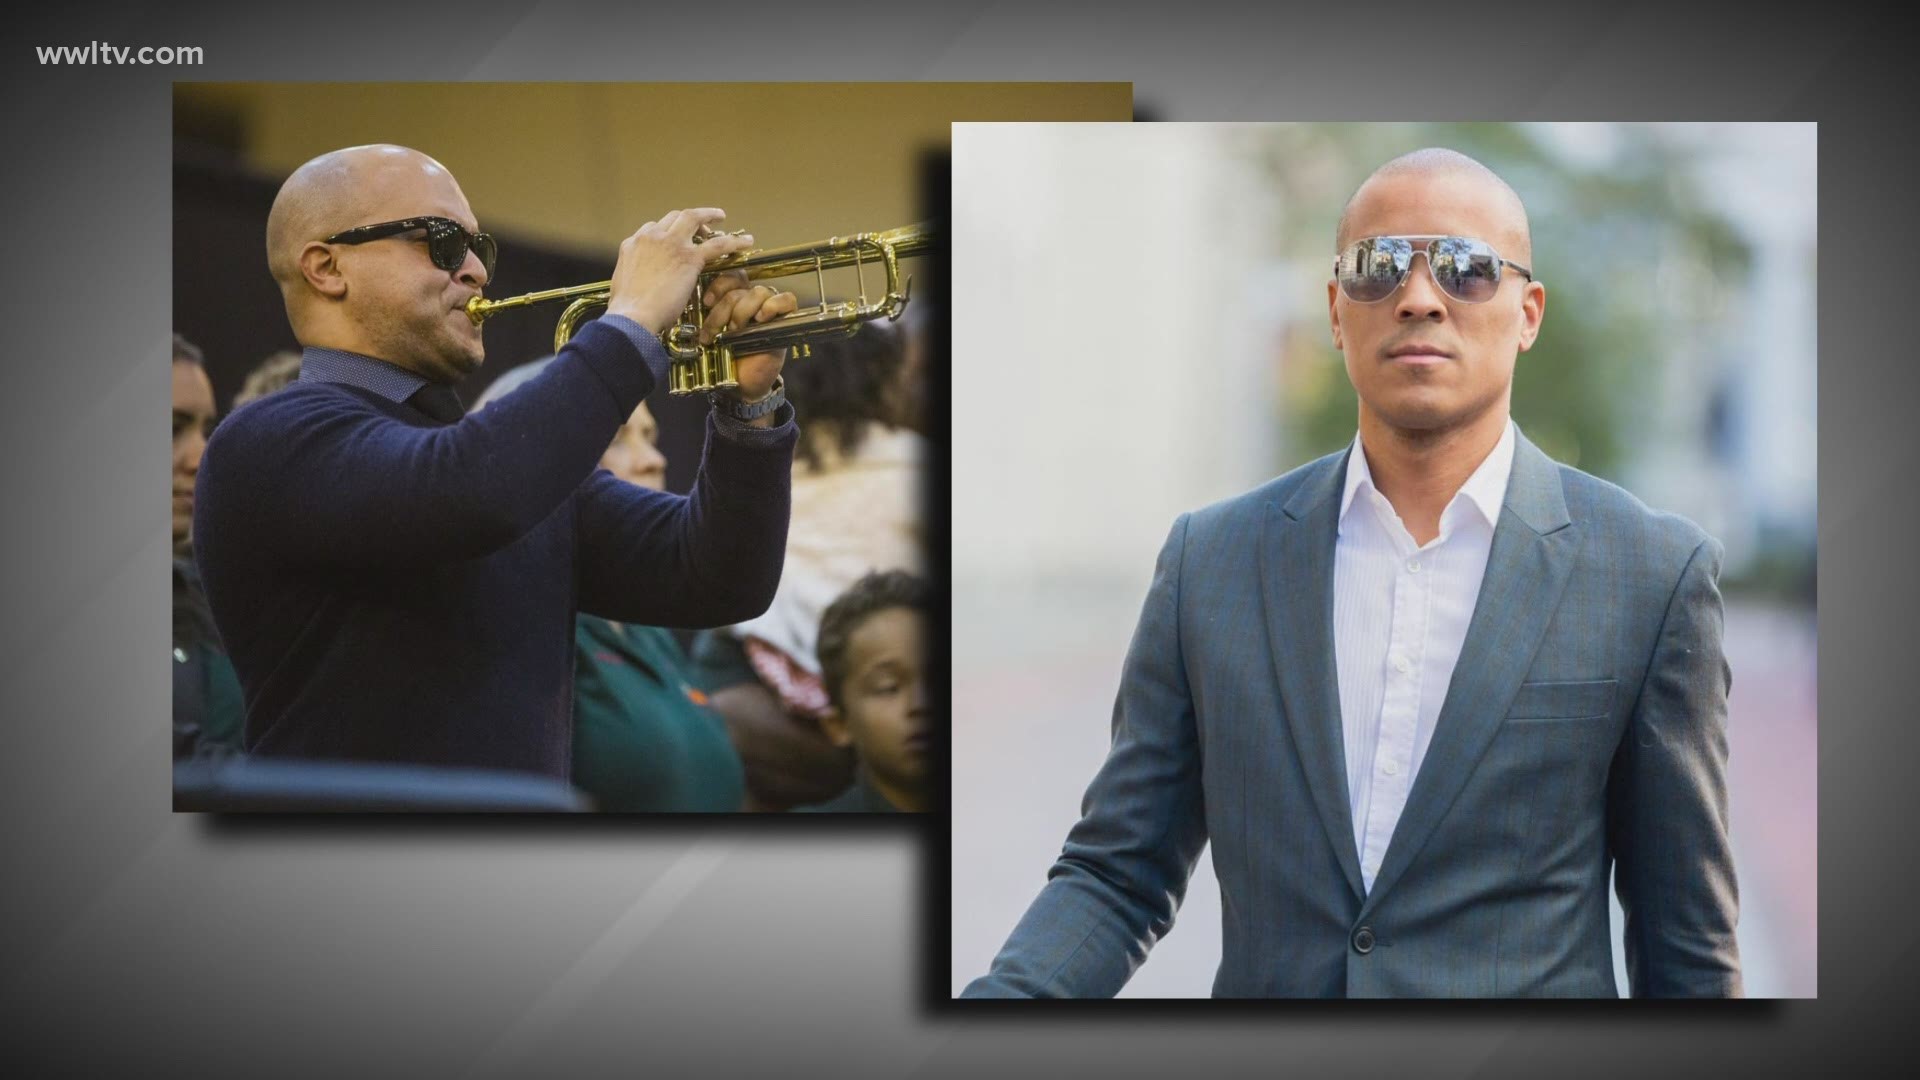 After 5 years of investigation Irvin Mayfield and his partner Ronald Markham plead guilty to charges of fraud and other charges